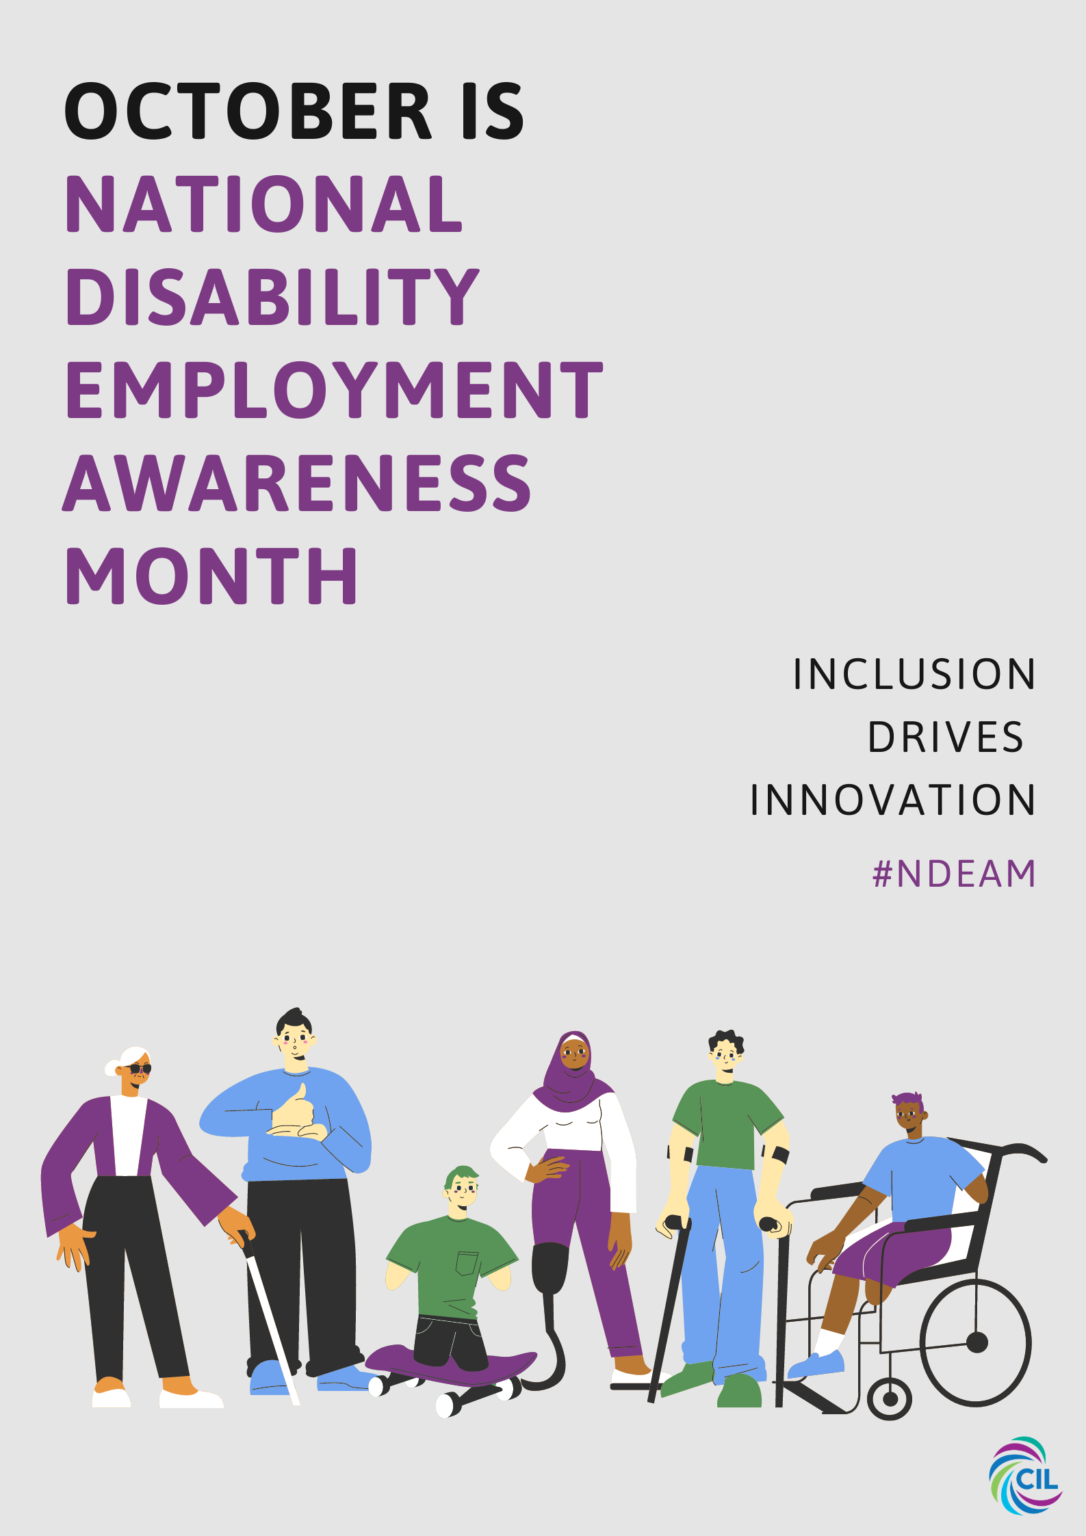 Disability Employment Awareness Month Center for Independent Living